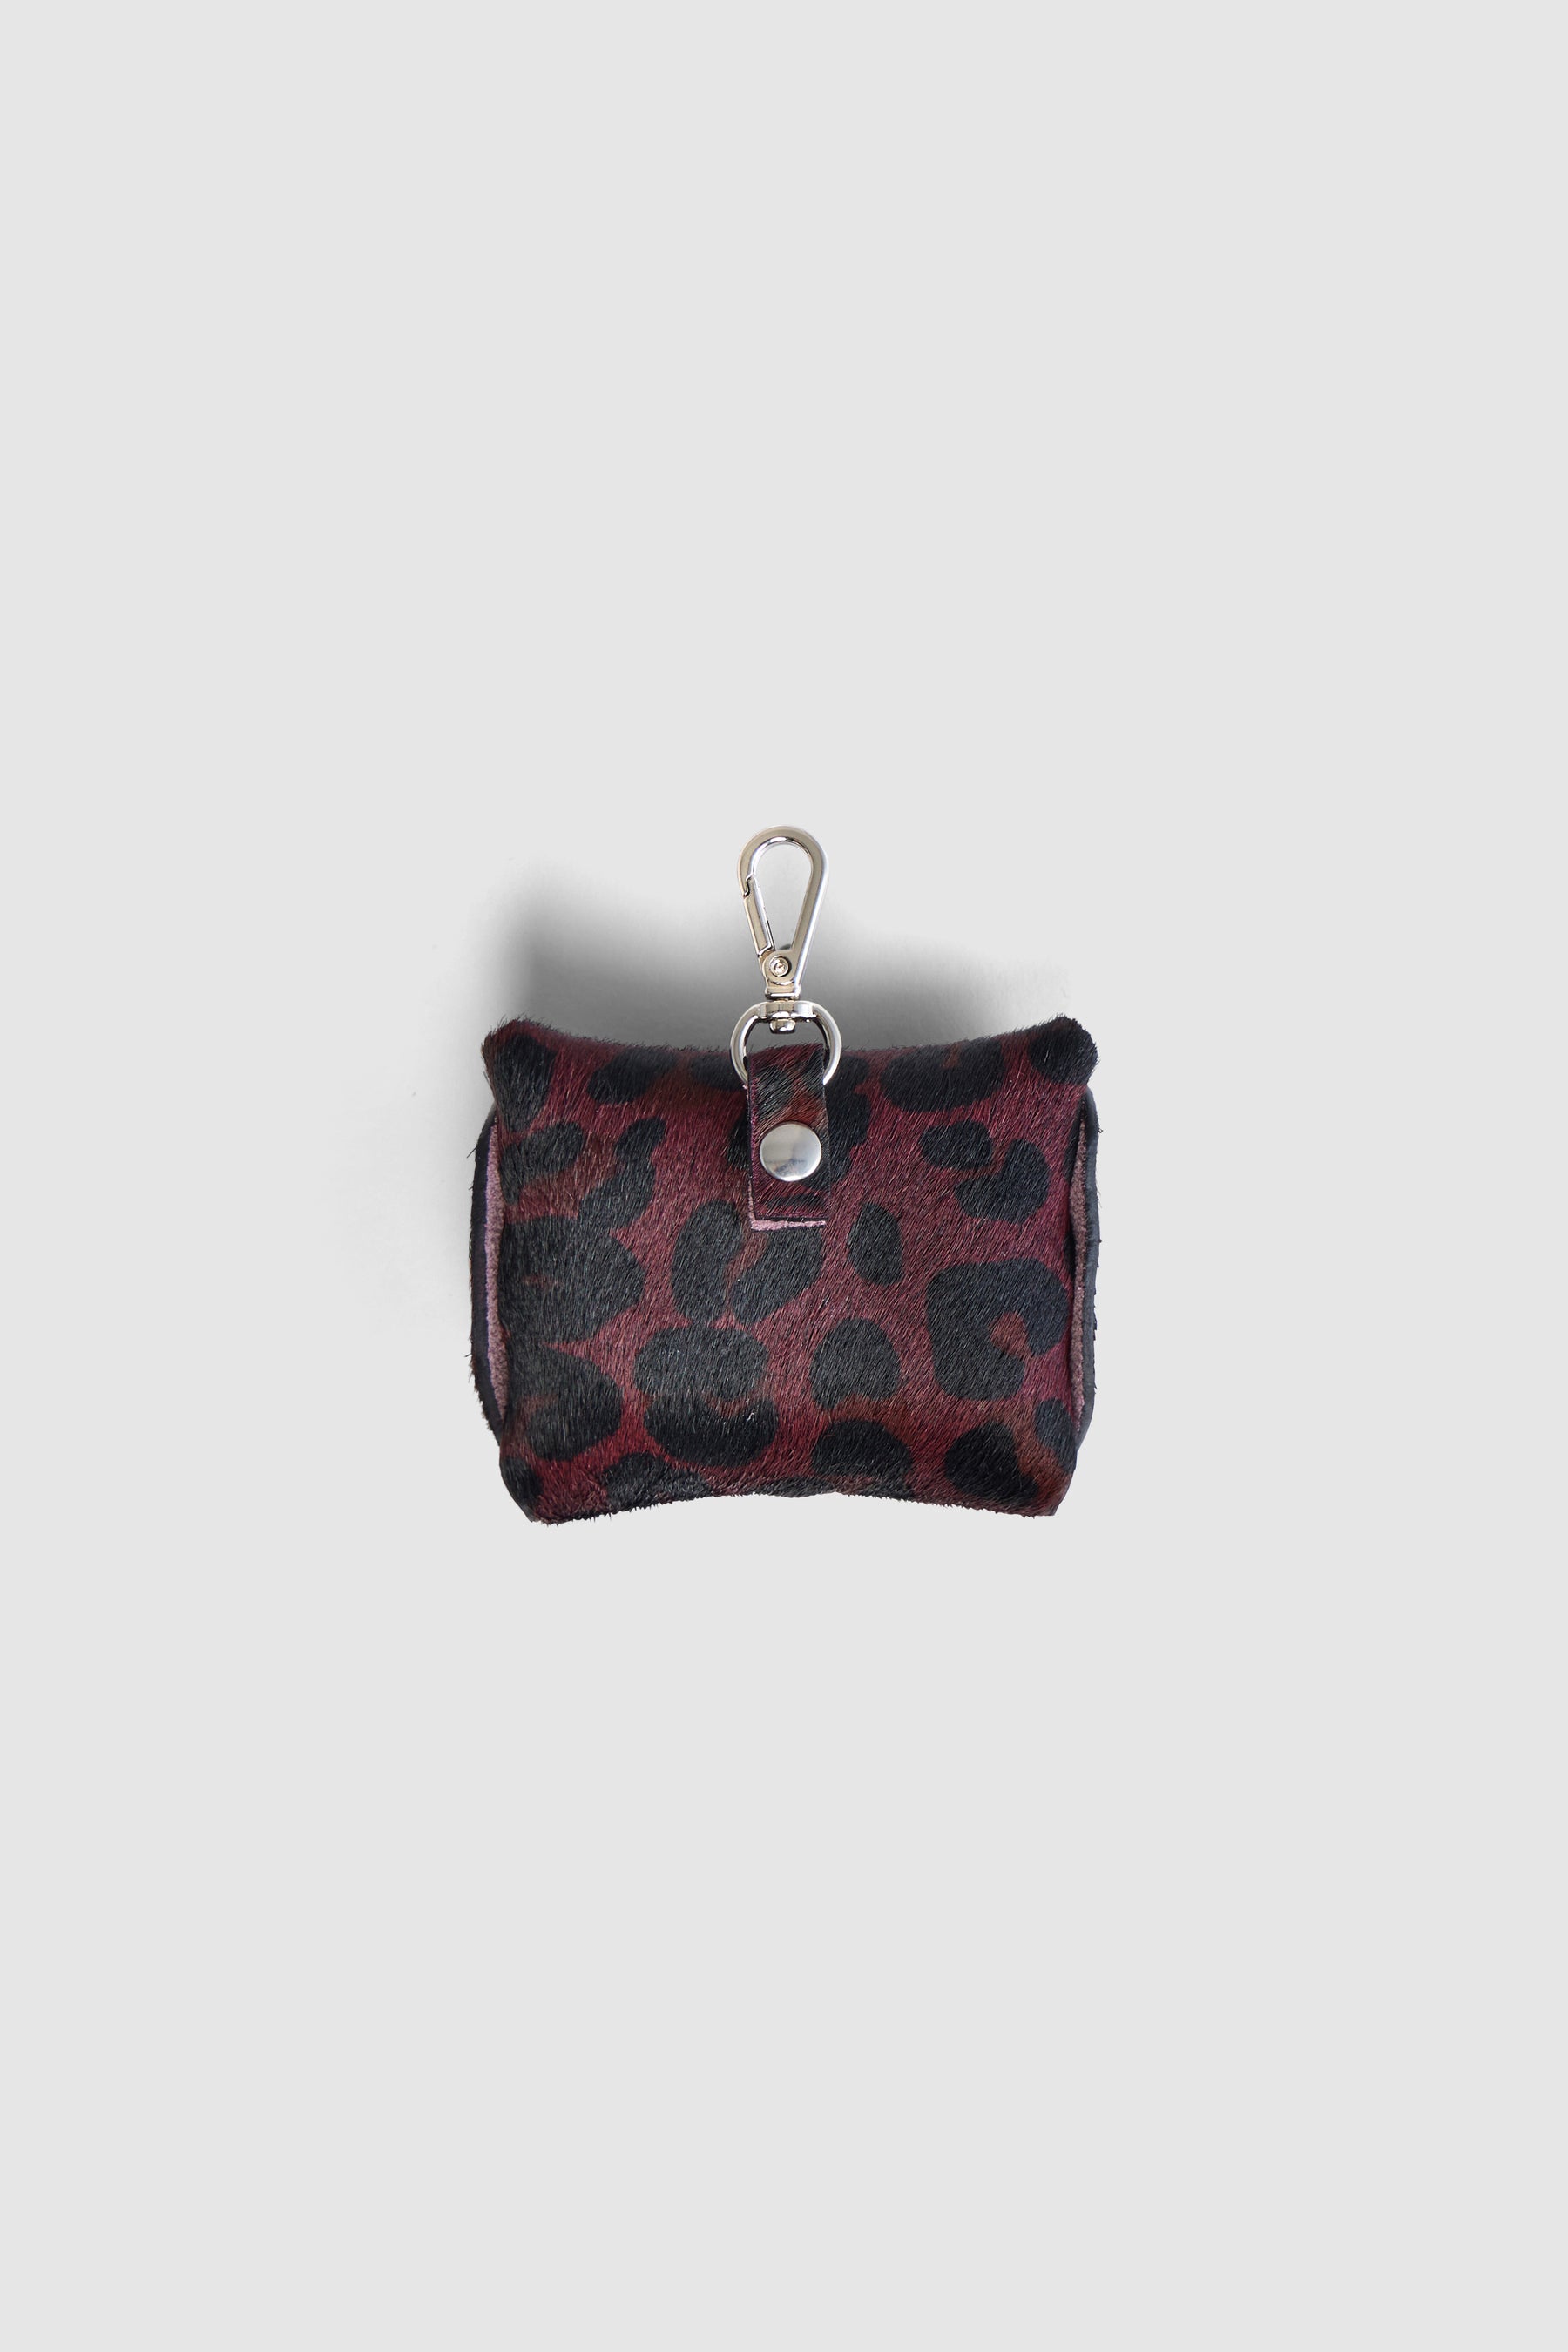 The Minis - Pro Airpods case in burgundy Leopard printed leather